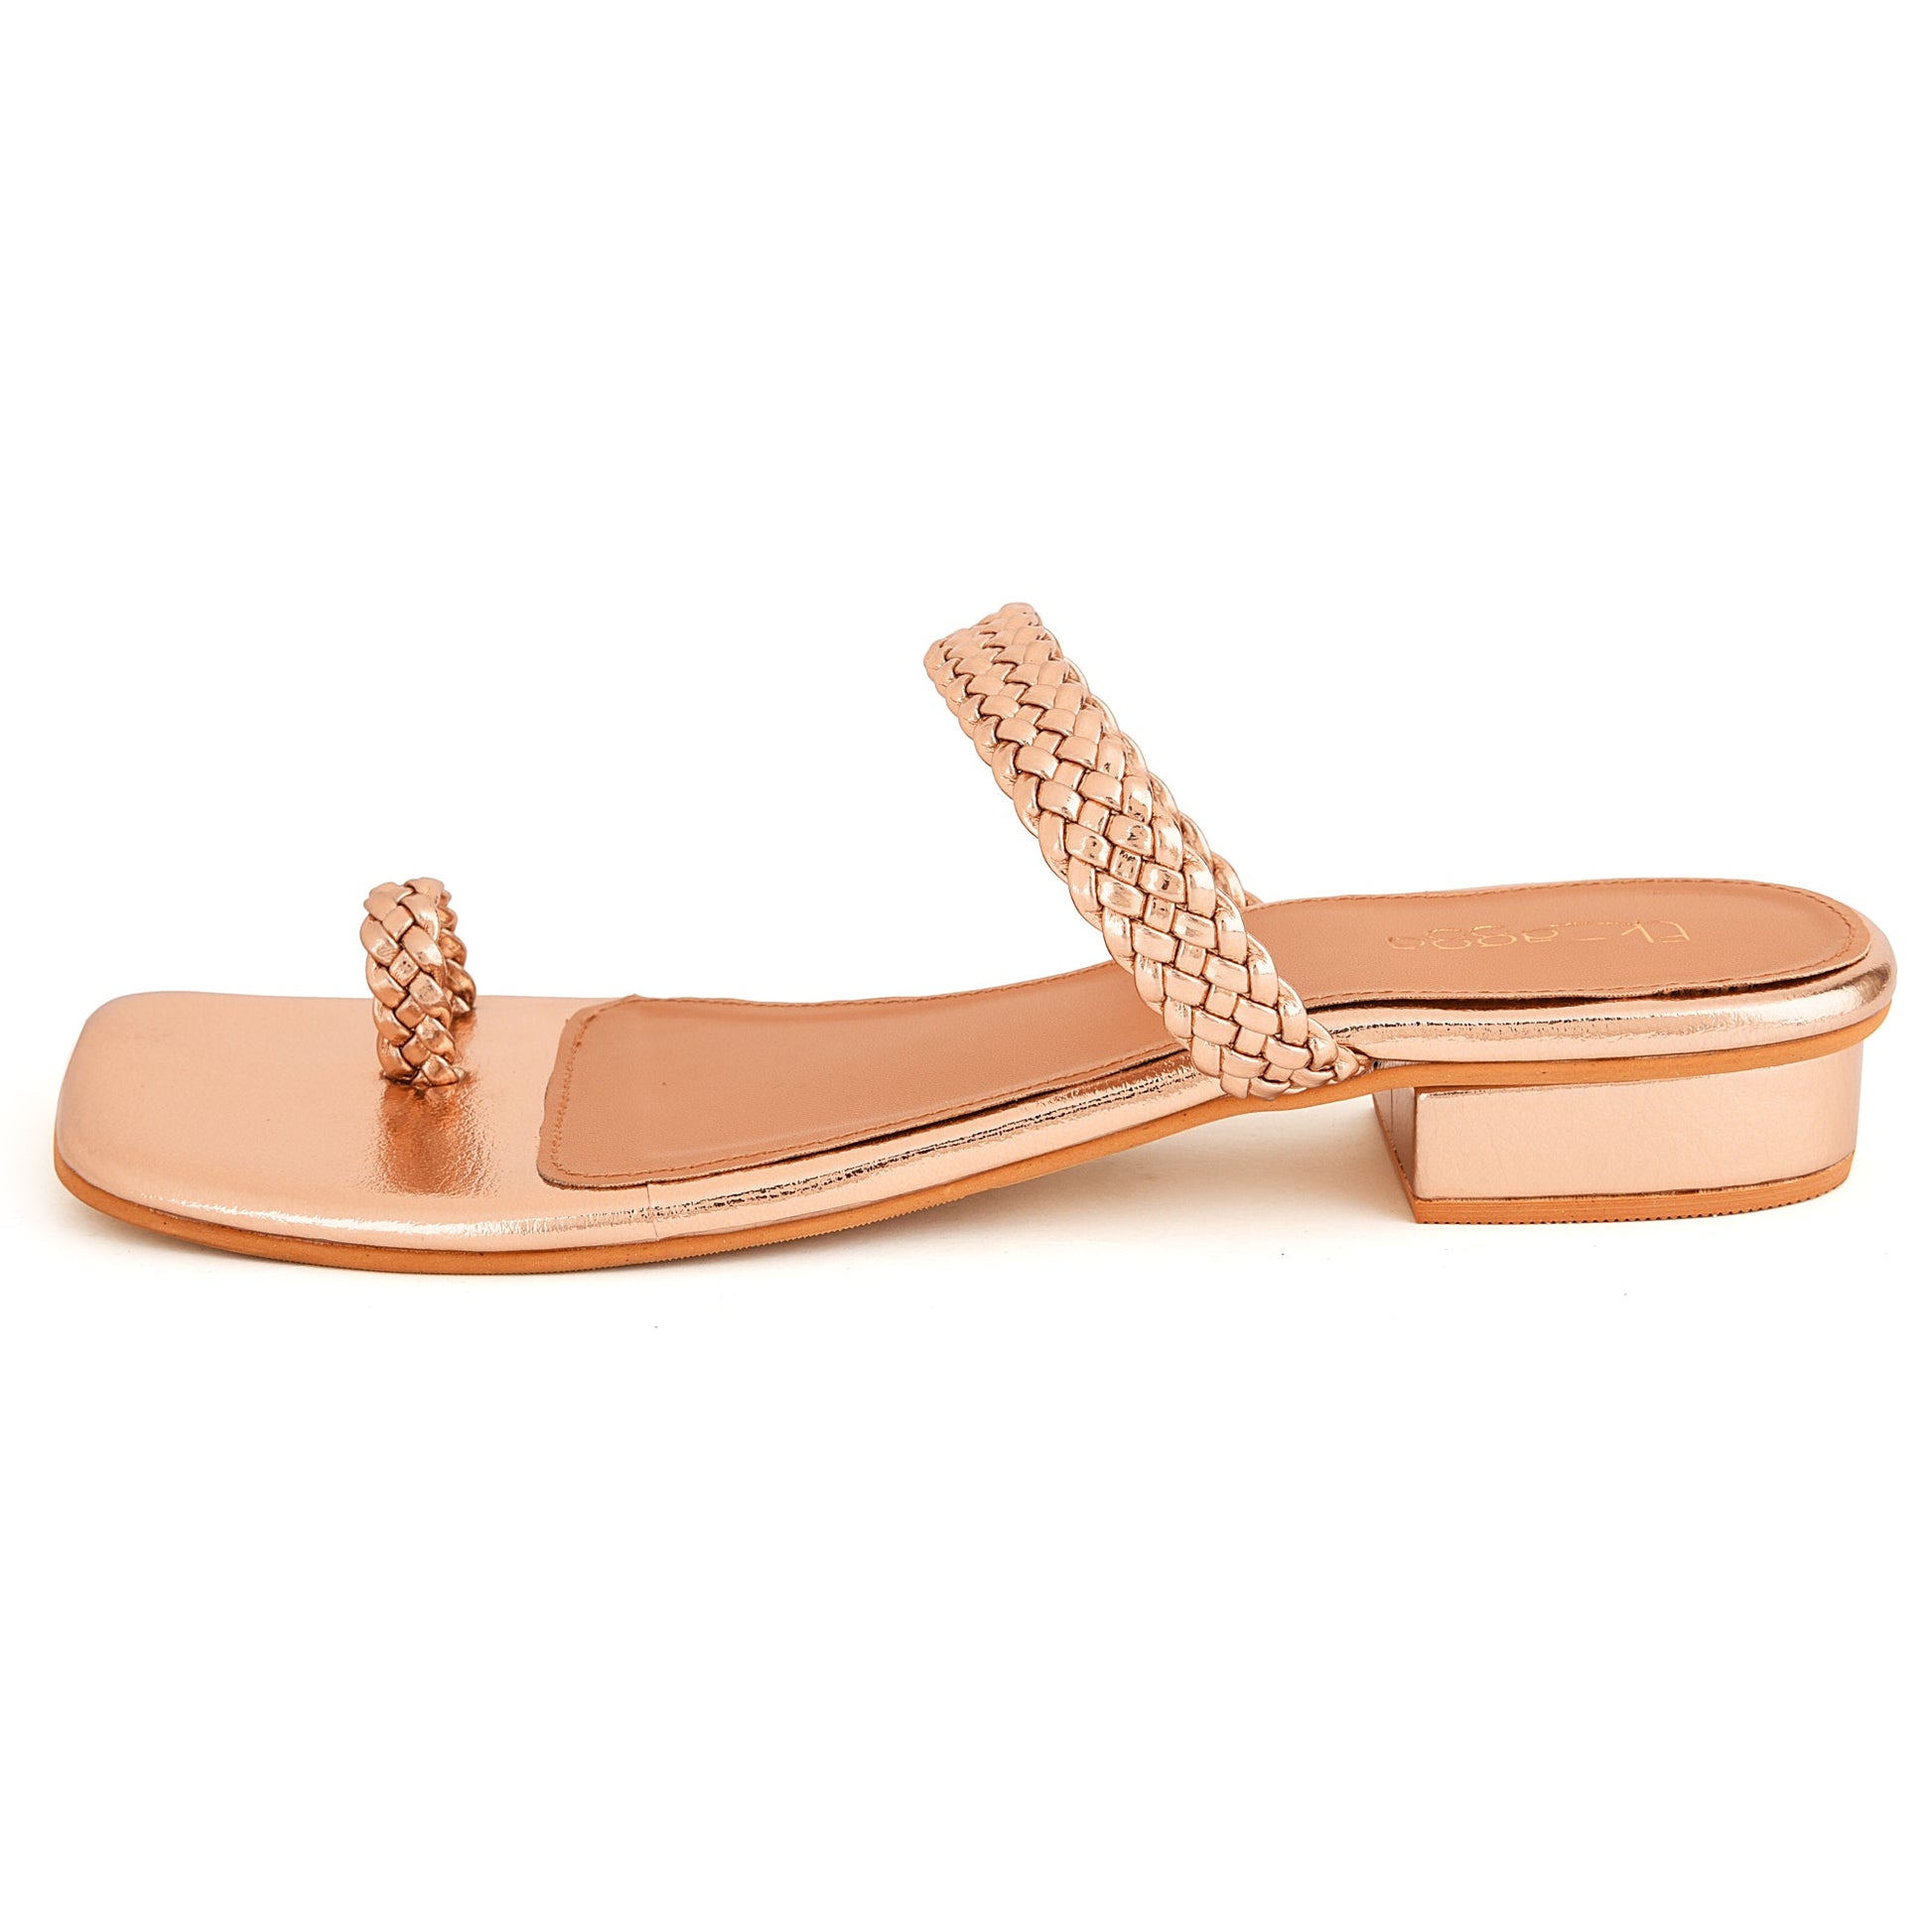 Golden Sandals at Kamakhyaa by EK_agga. This item is Gold, Heels, Less than $50, Party Wear, Patent leather, Red, Regular Fit, Square toe, Textured, Vegan